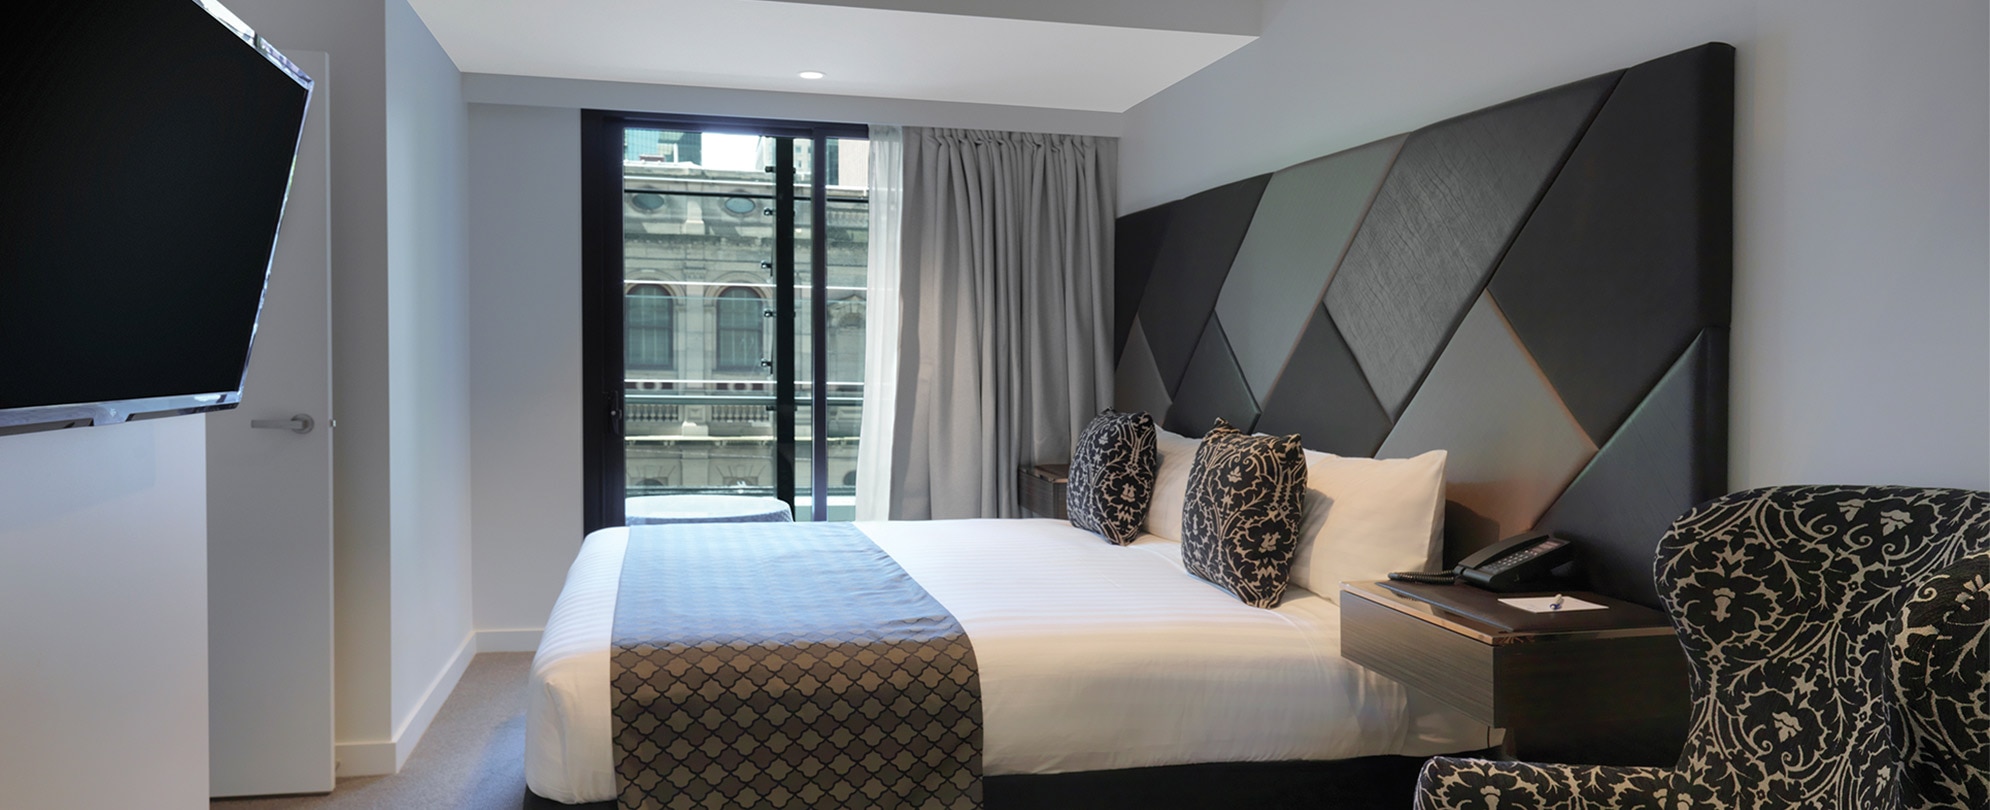 The master bedroom of the grand suite at Club Wyndham Melbourne.